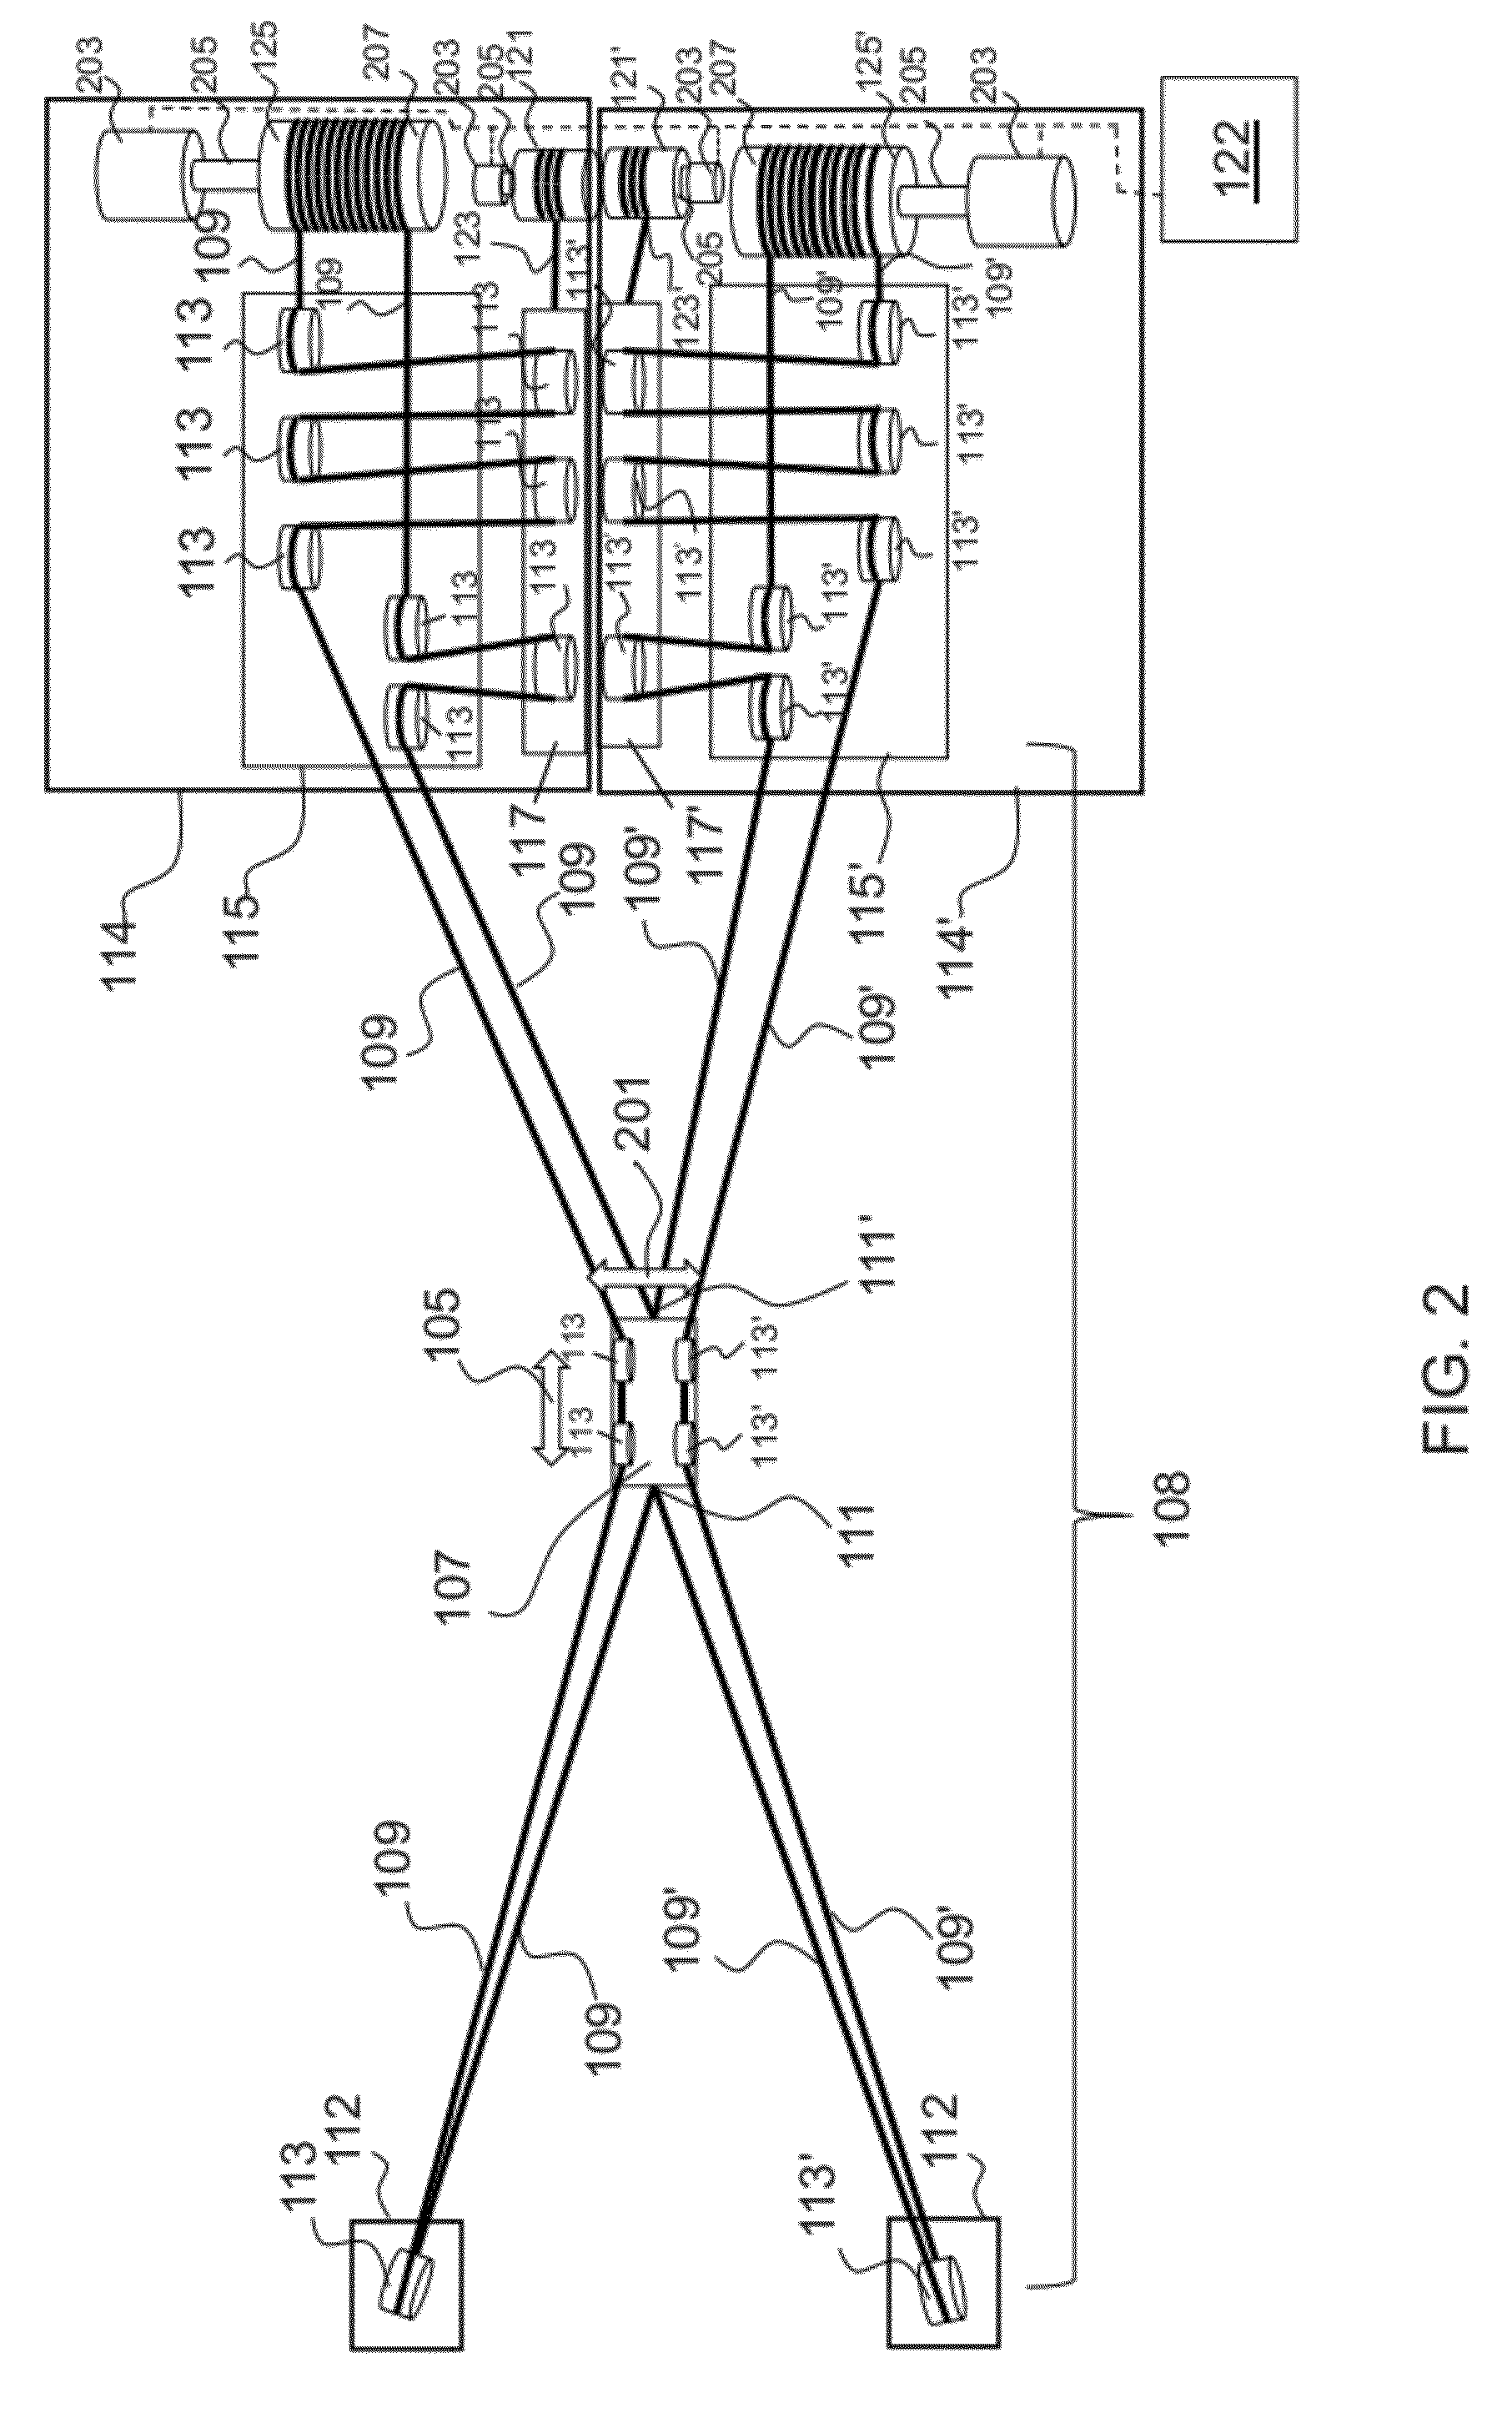 Multidimensional positioning system and method